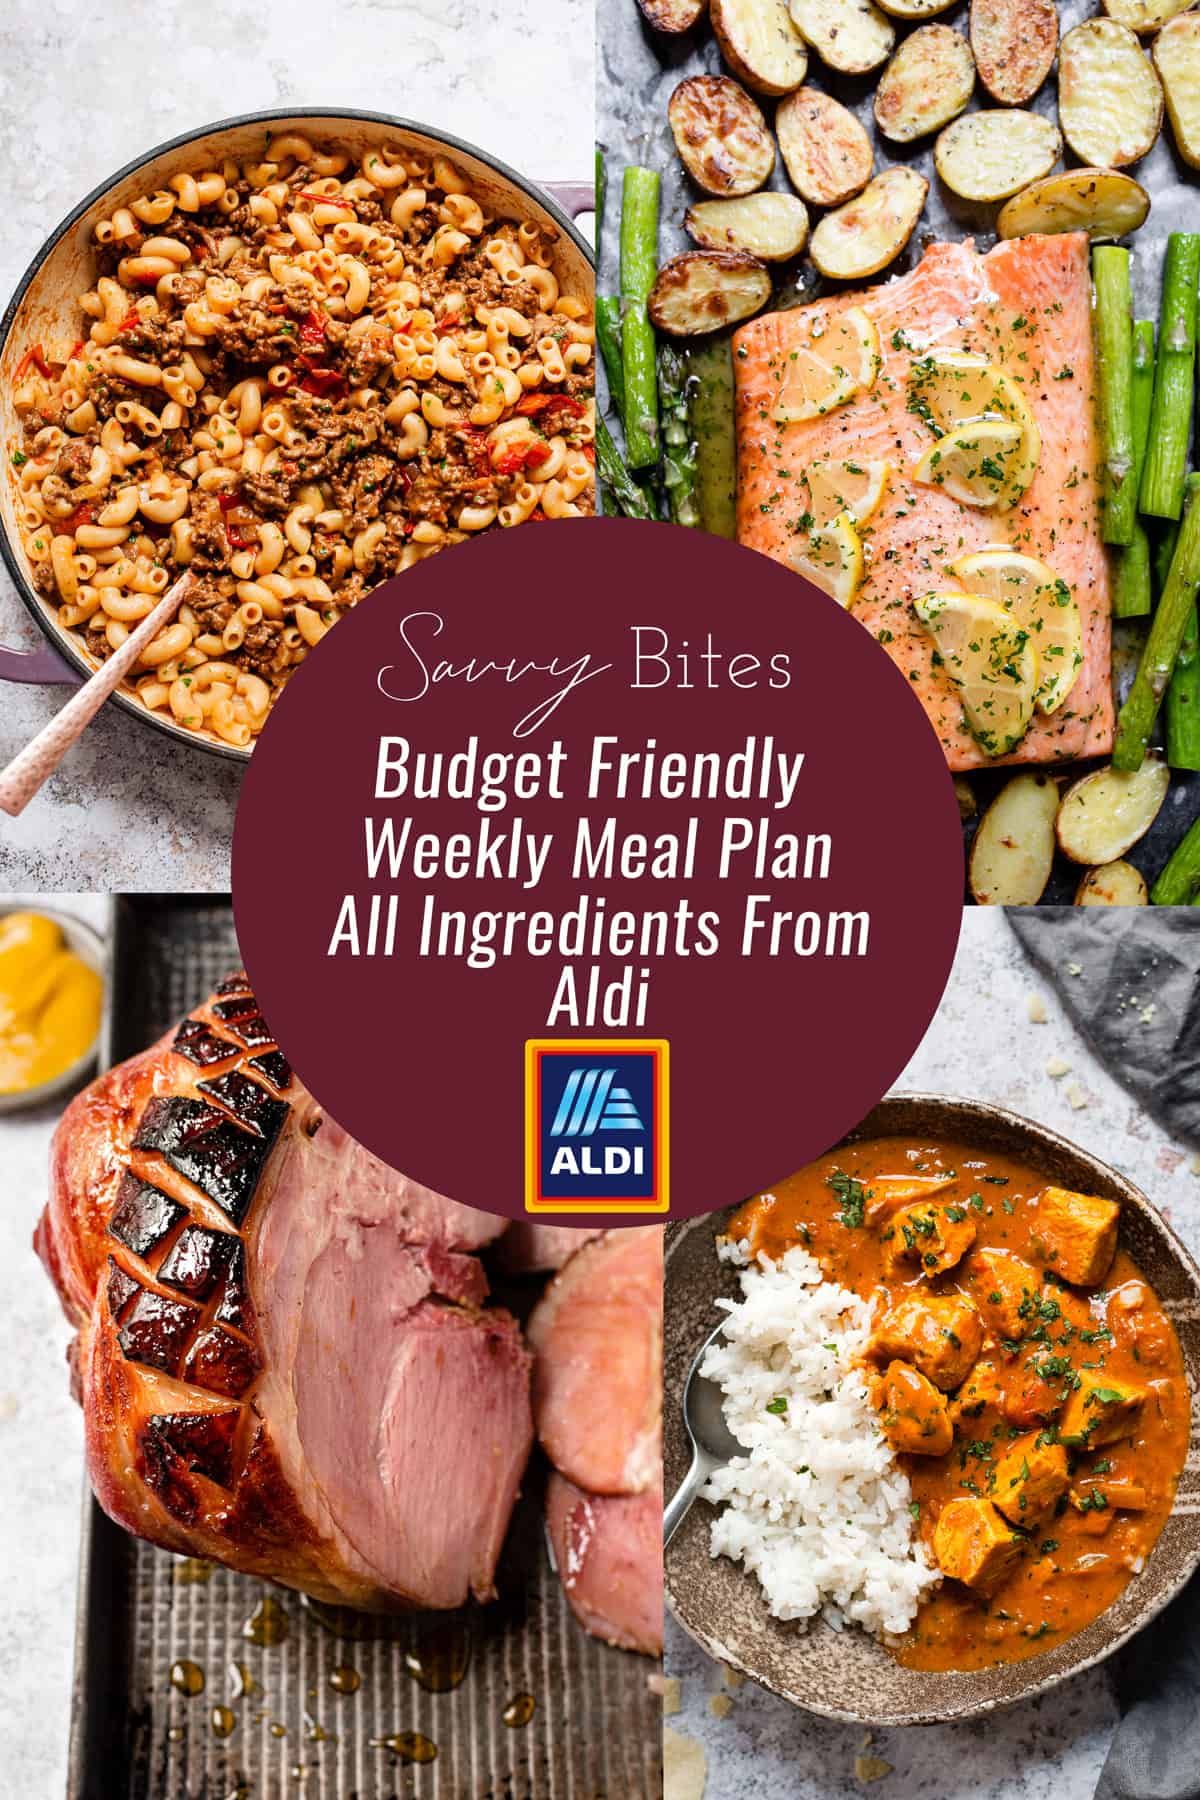 Aldi meal plan photo collage